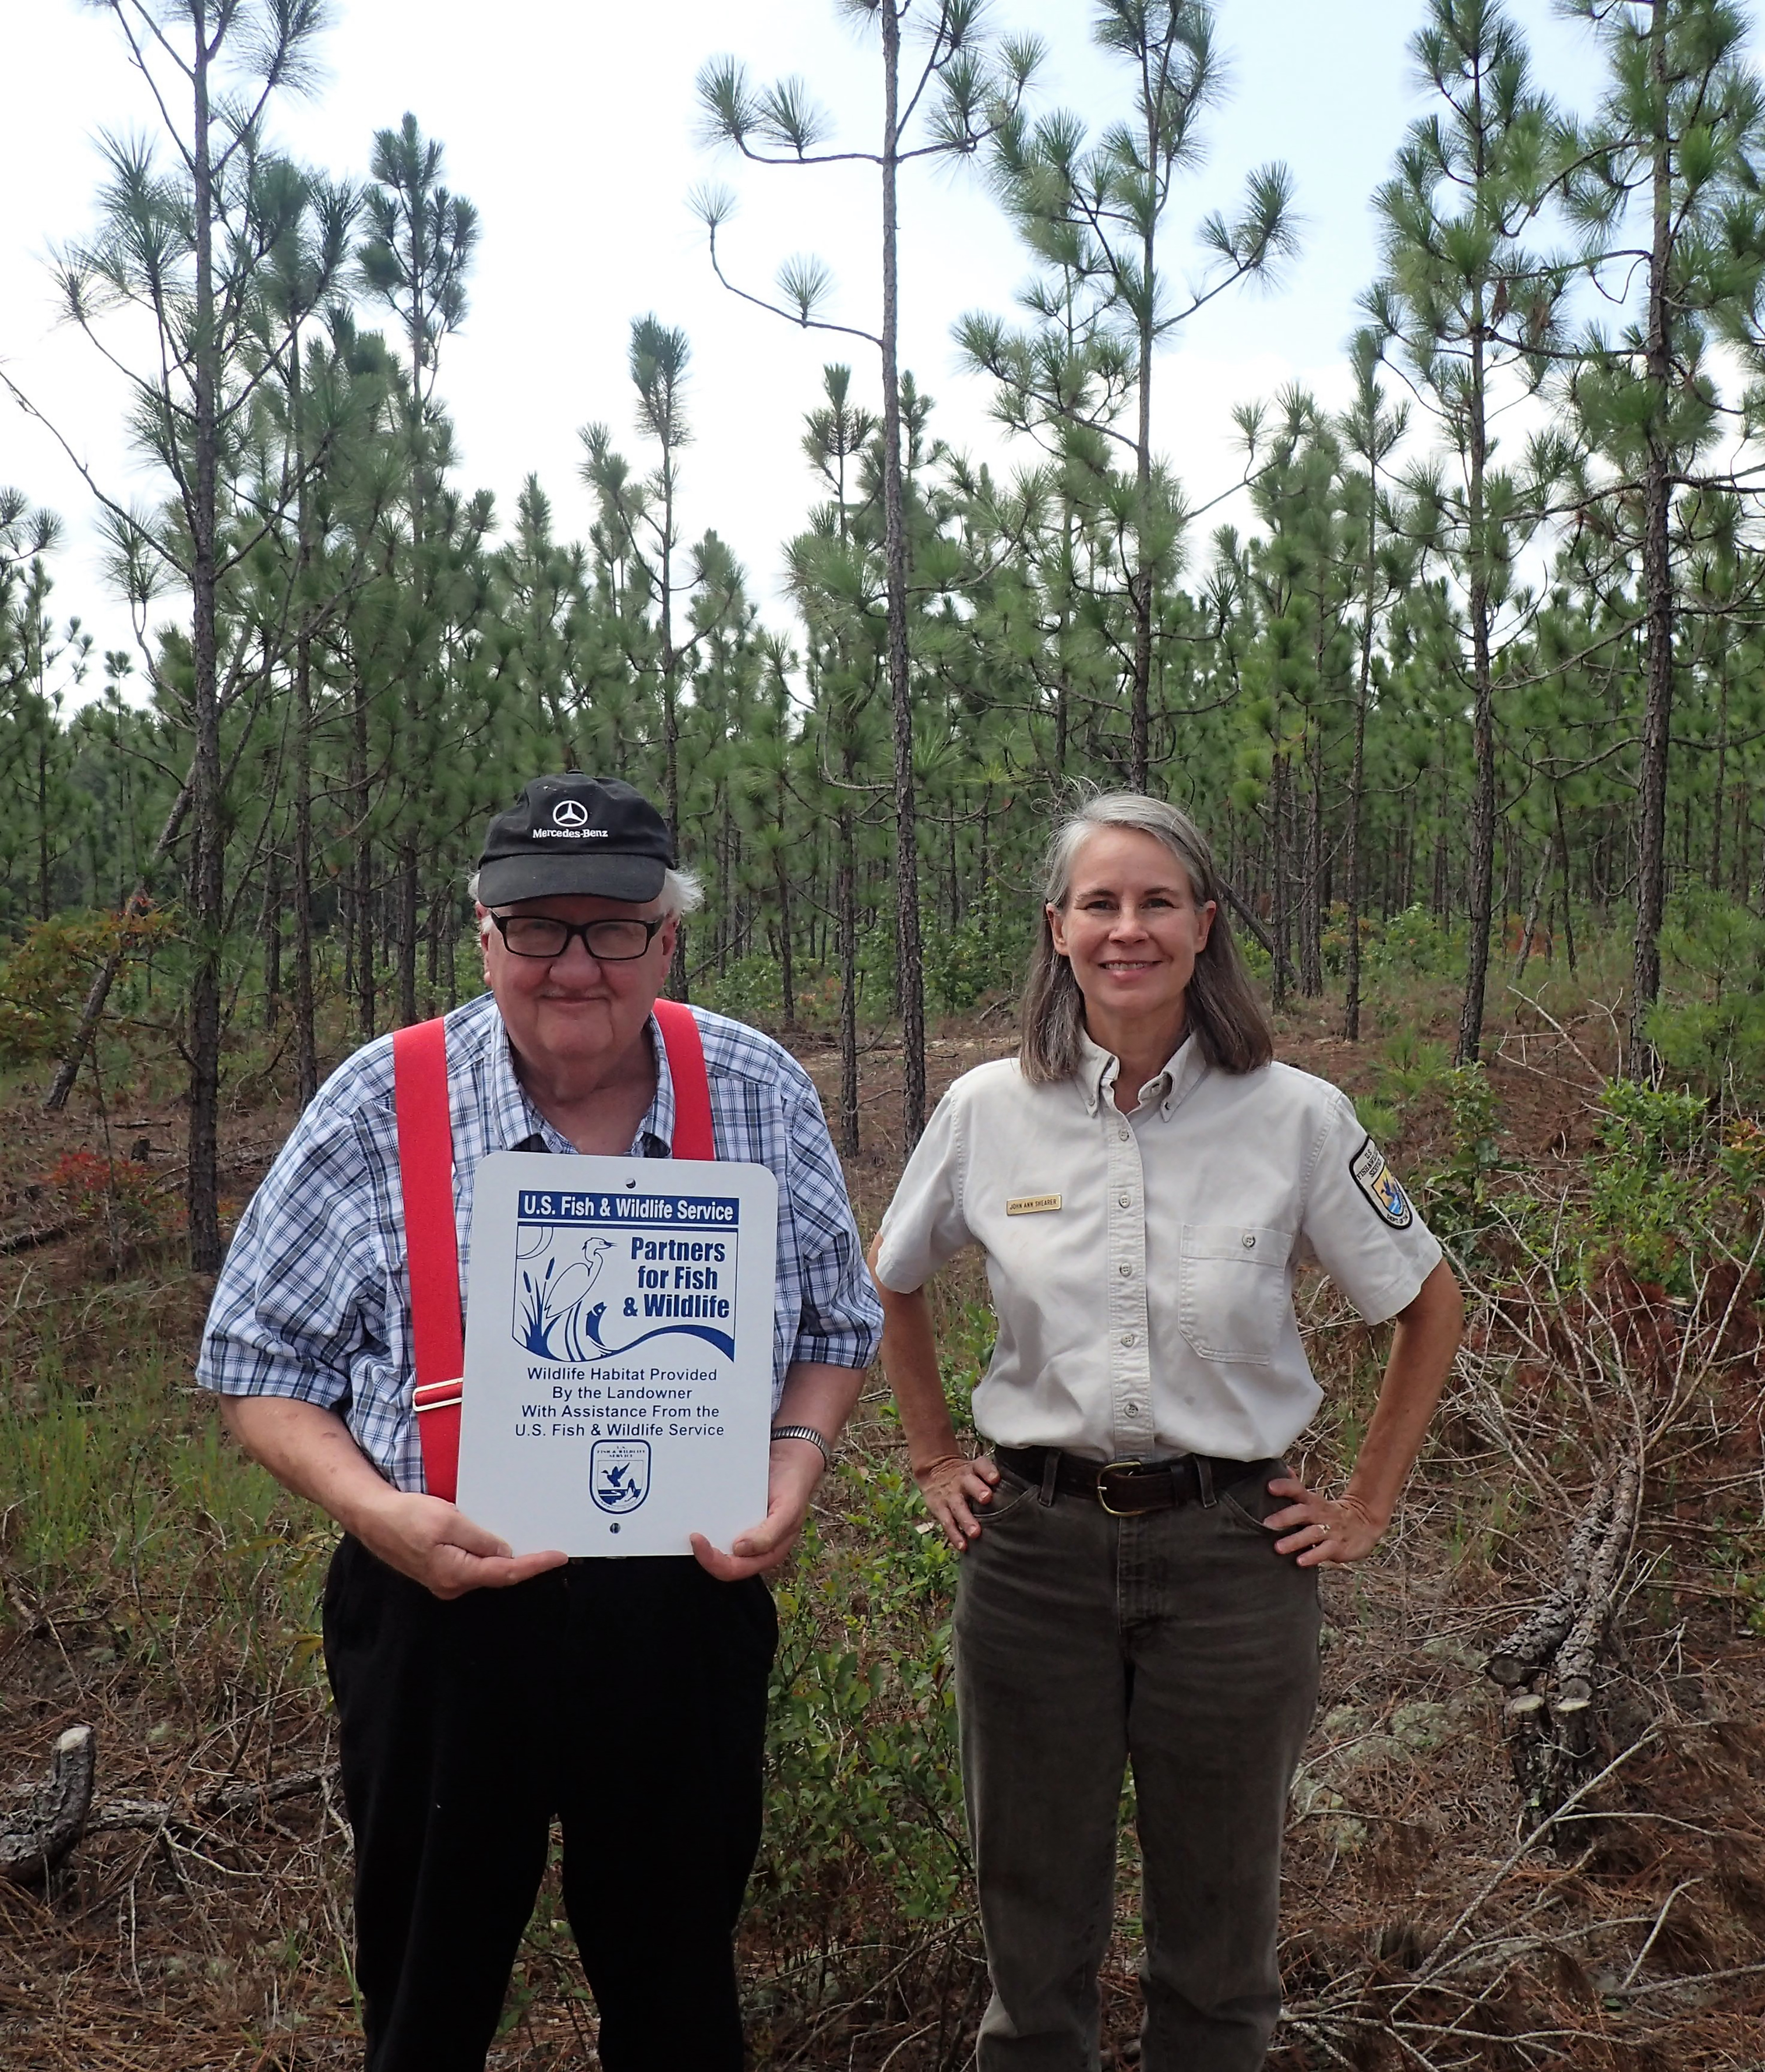 man holds a sign that reads "Partners for Fish and Wildlife". A woman in uniform stands next to him and they are both facing the camera with a young pine forest behind them.